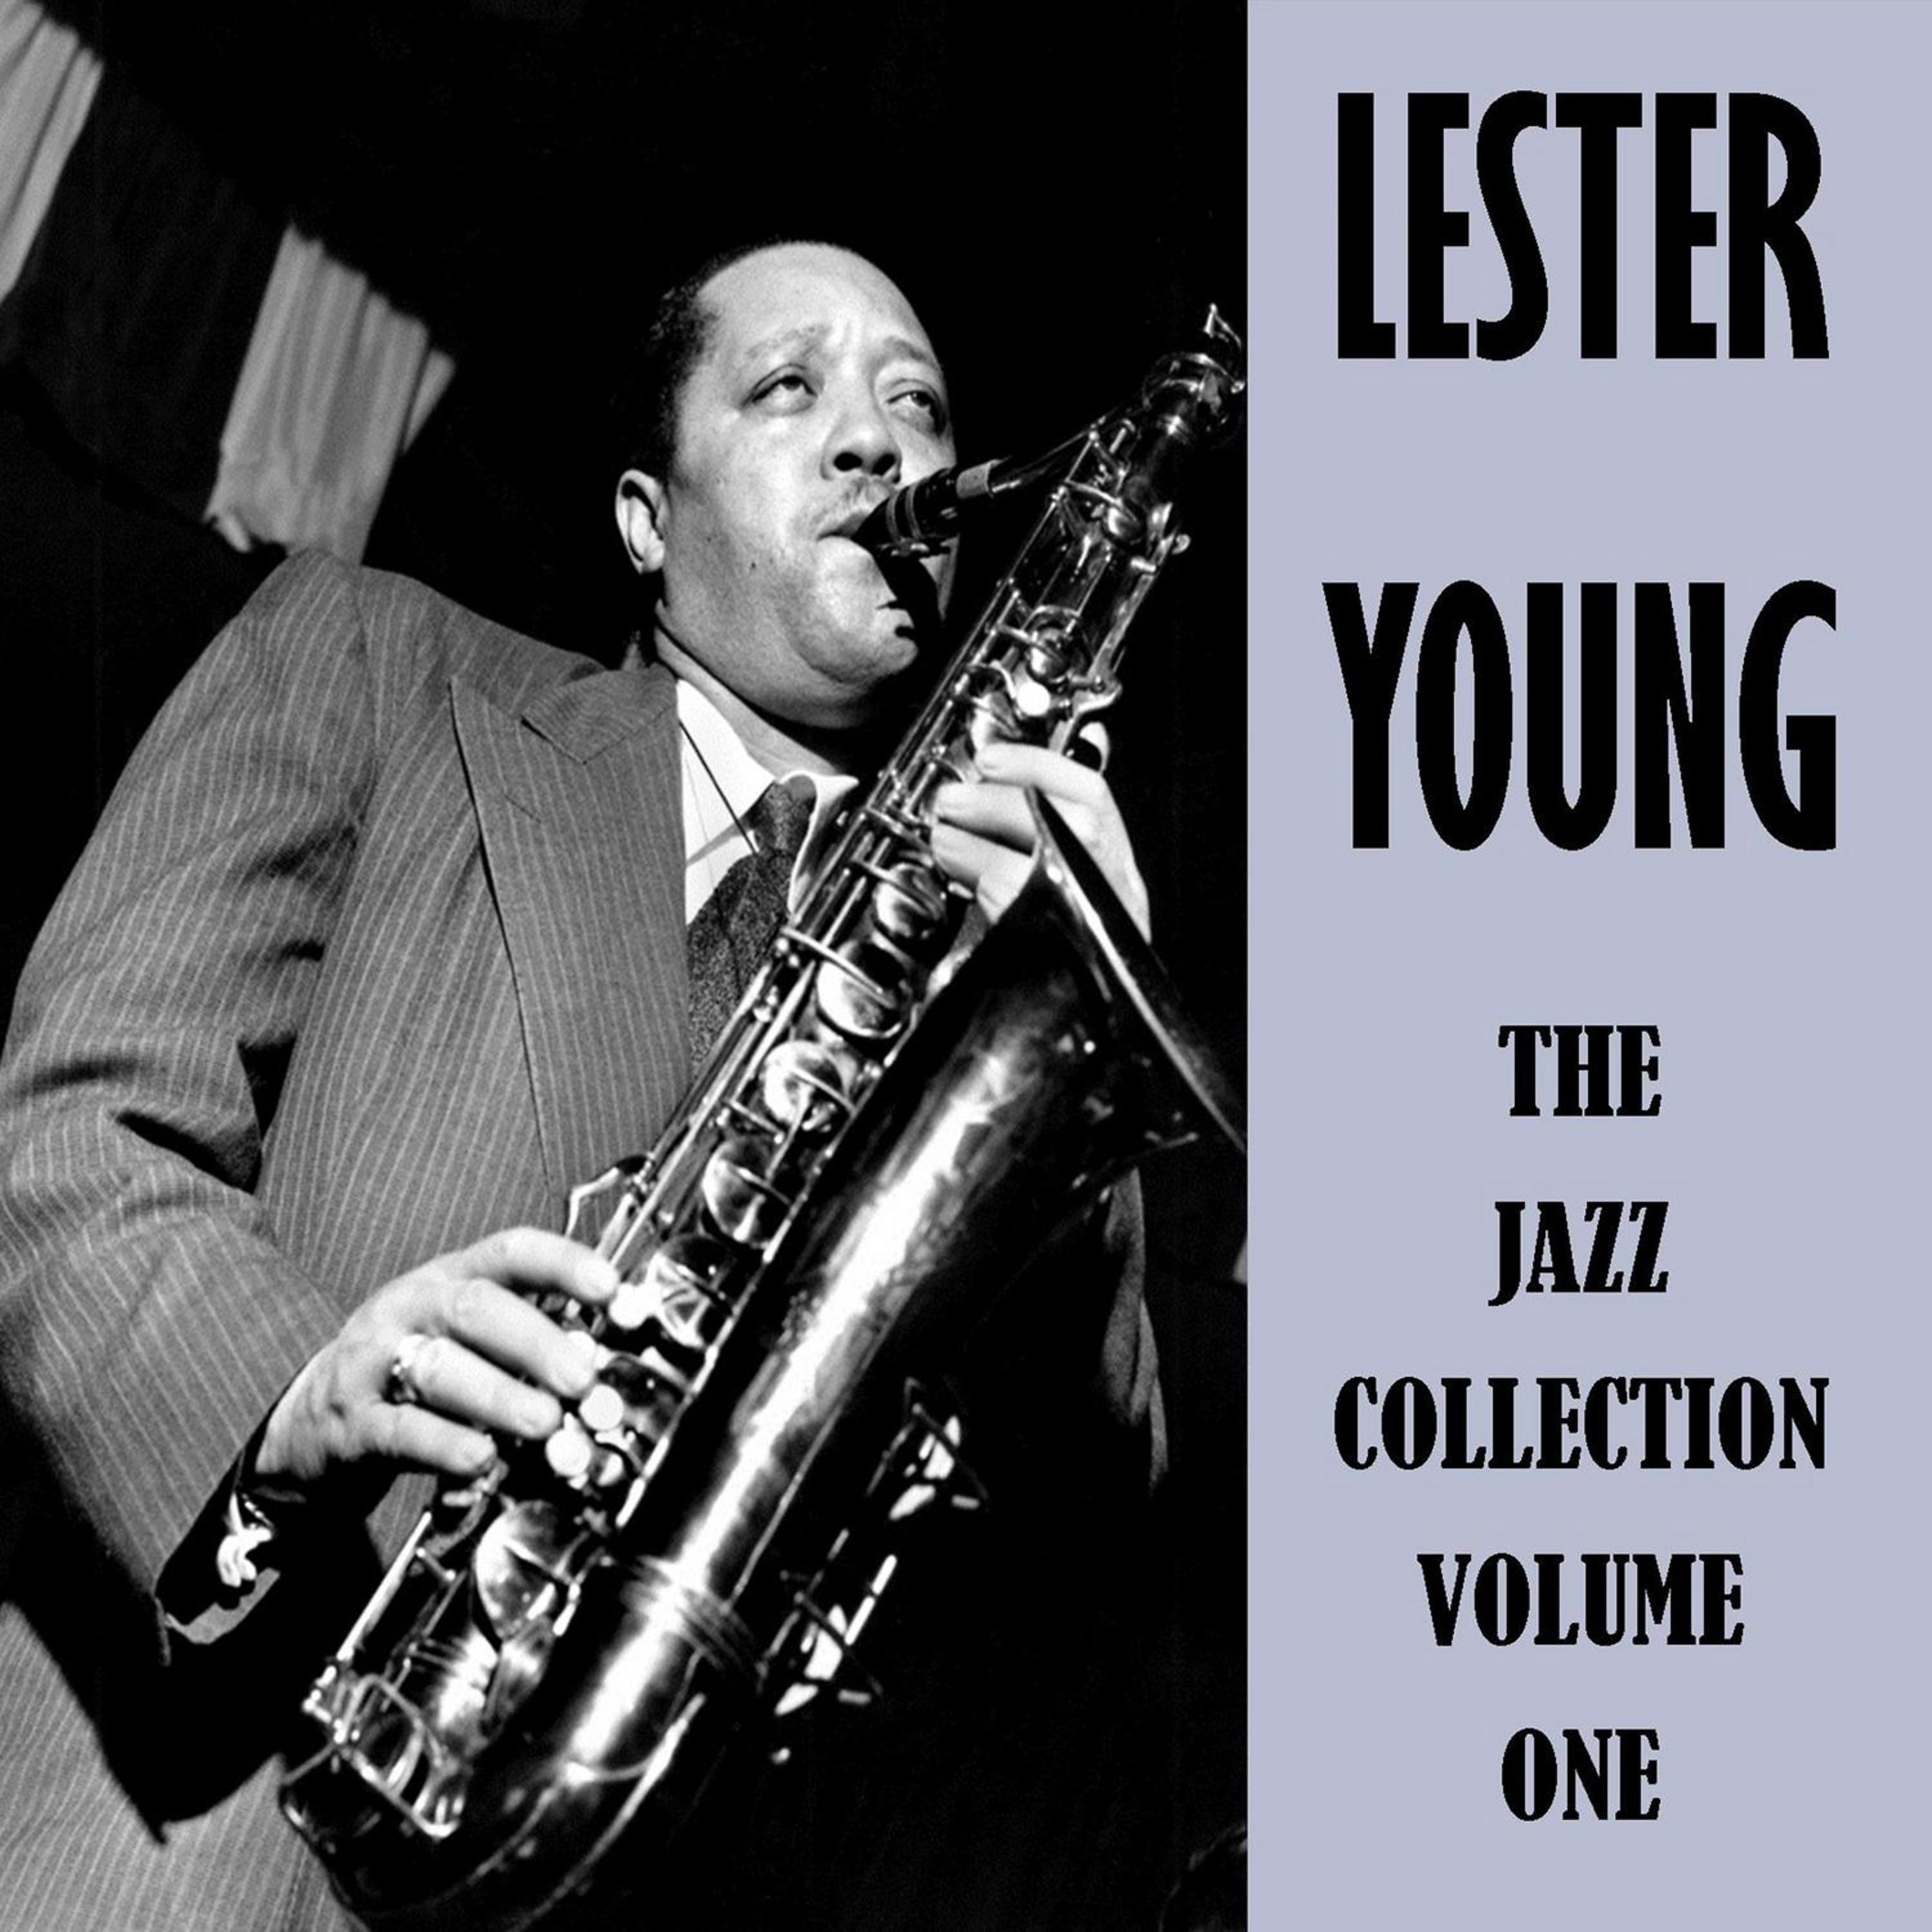 Лестер янг. The Lester young-Teddy Wilson Quartet – pres and Teddy. Lester young, Teddy Wilson Quartet - pres and Teddy CD. Arne Domnerus Group - Jazz at the pawnshop 2.